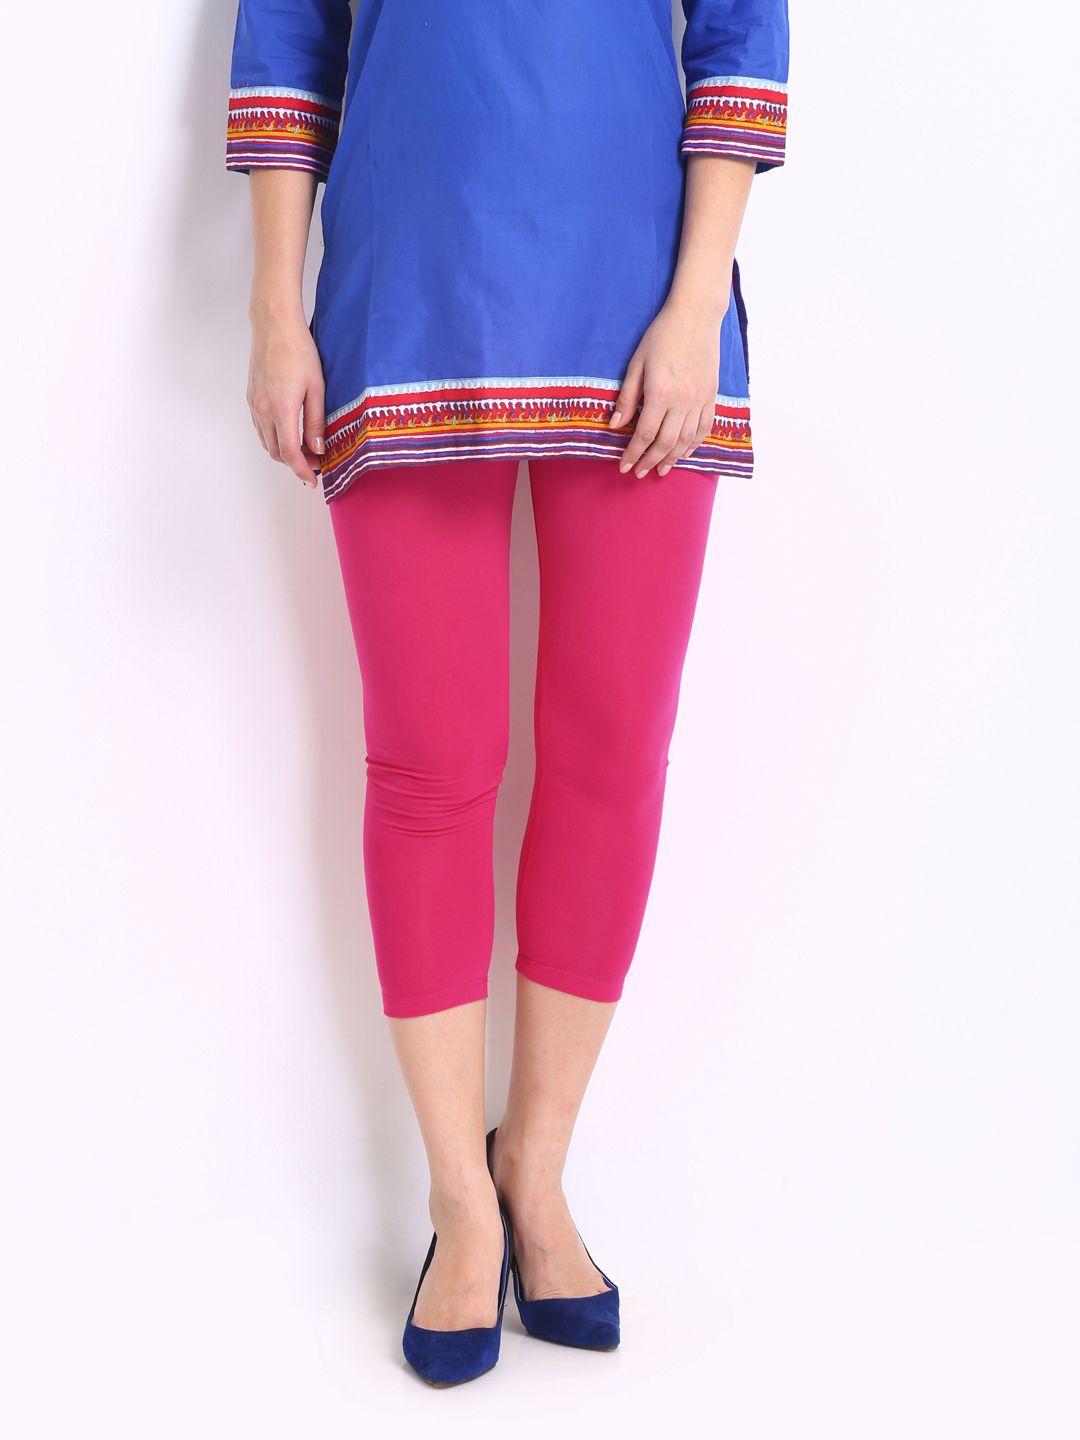 Go Colors Women Pink Solid 3/4 Length Leggings Price in India, Full  Specifications & Offers